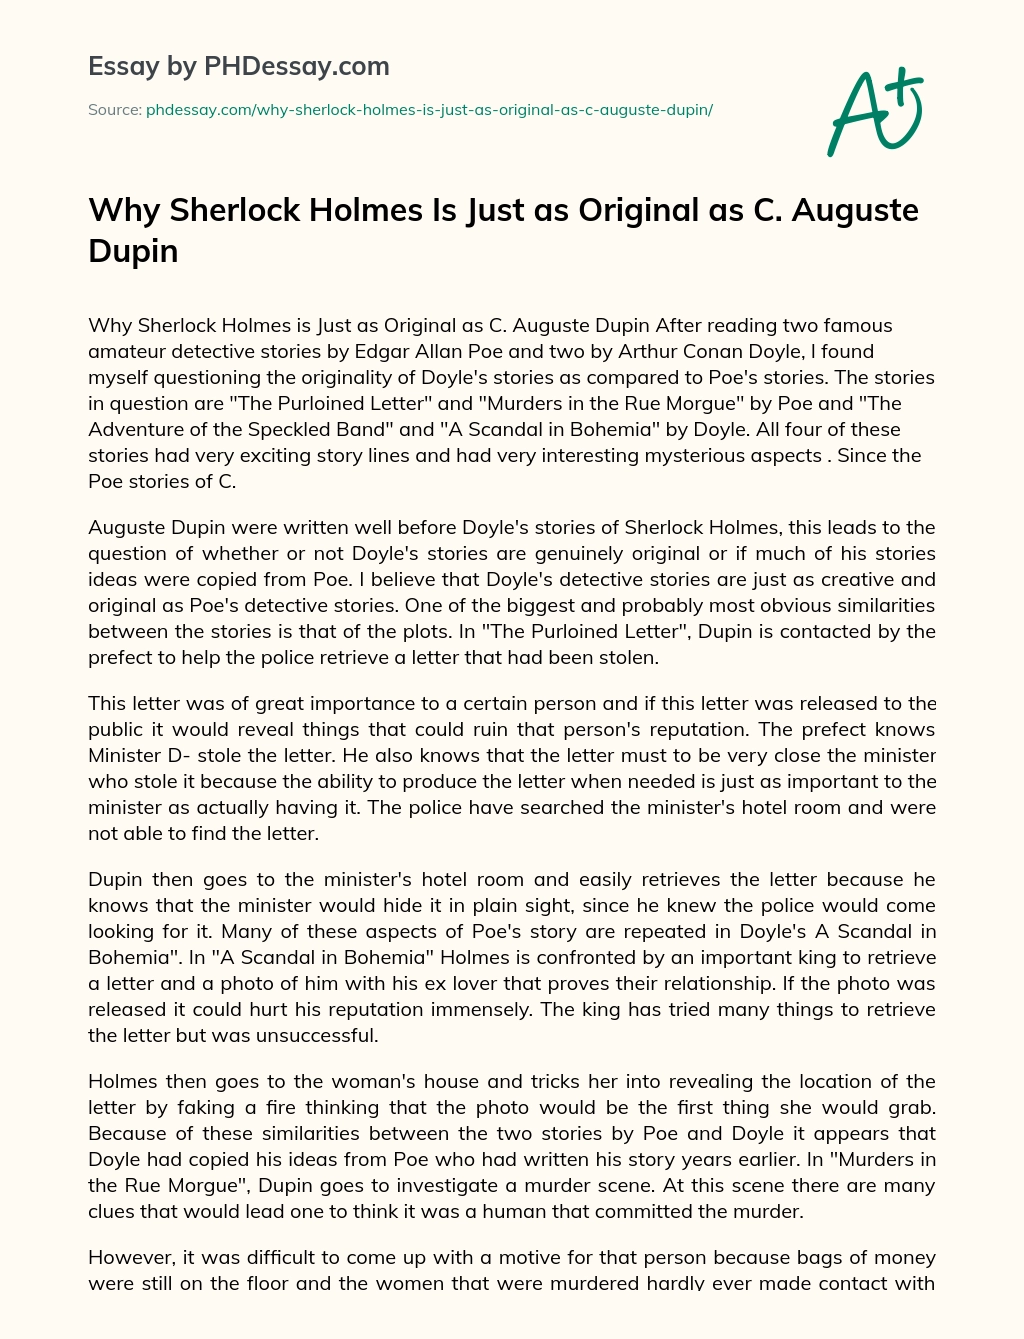 Why Sherlock Holmes Is Just as Original as C. Auguste Dupin essay